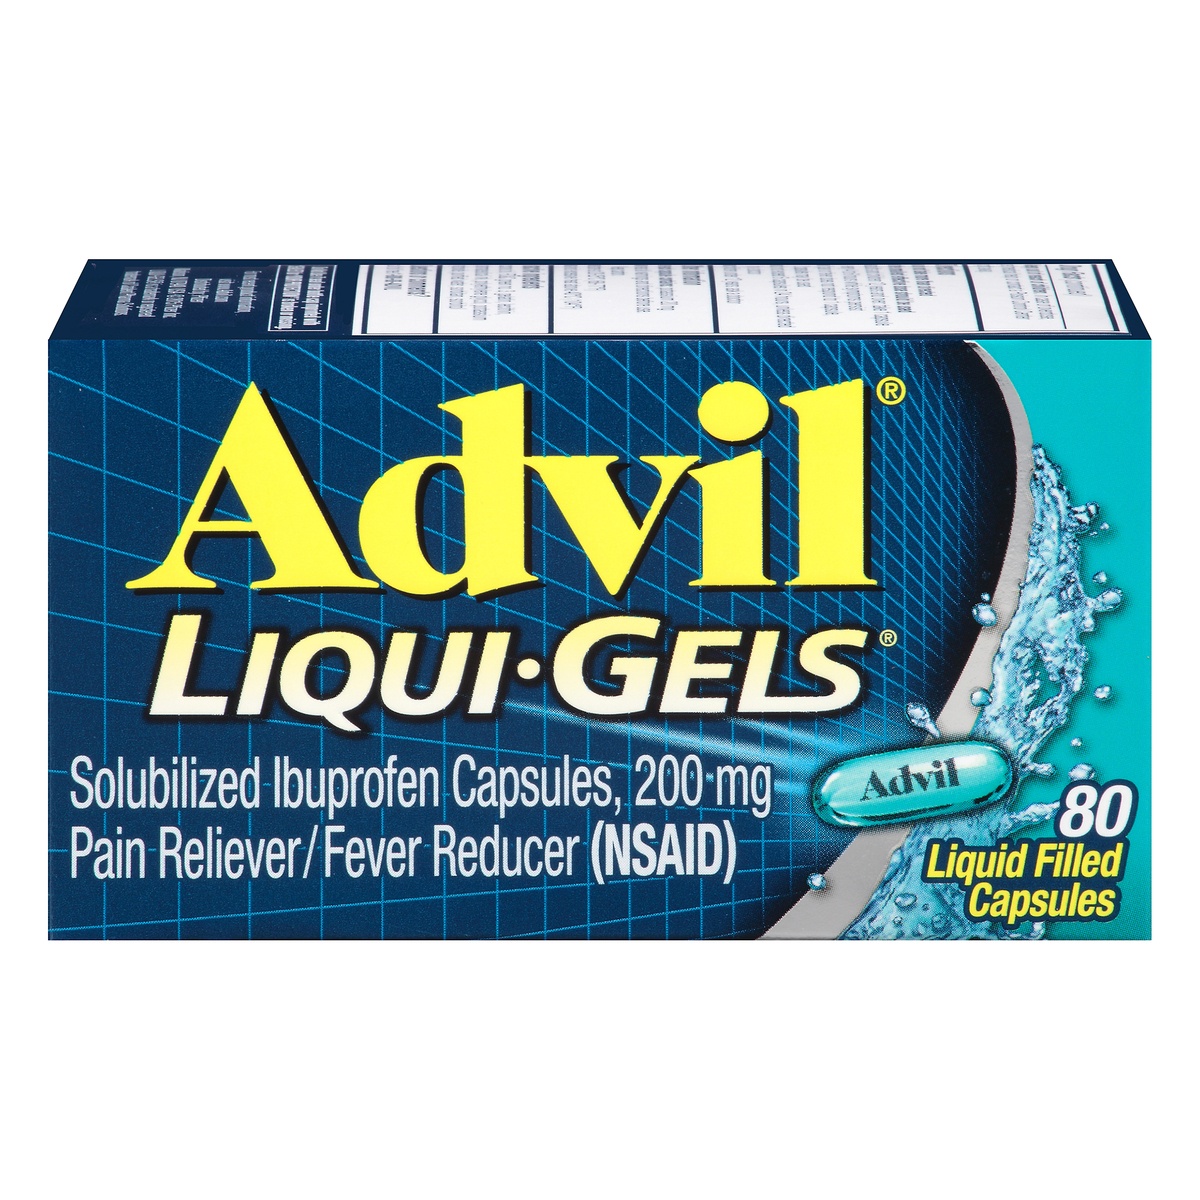 slide 8 of 8, Advil Liquid Filled Capsules 200 mg Pain Reliever/Fever Reducer 80 ea, 80 ct